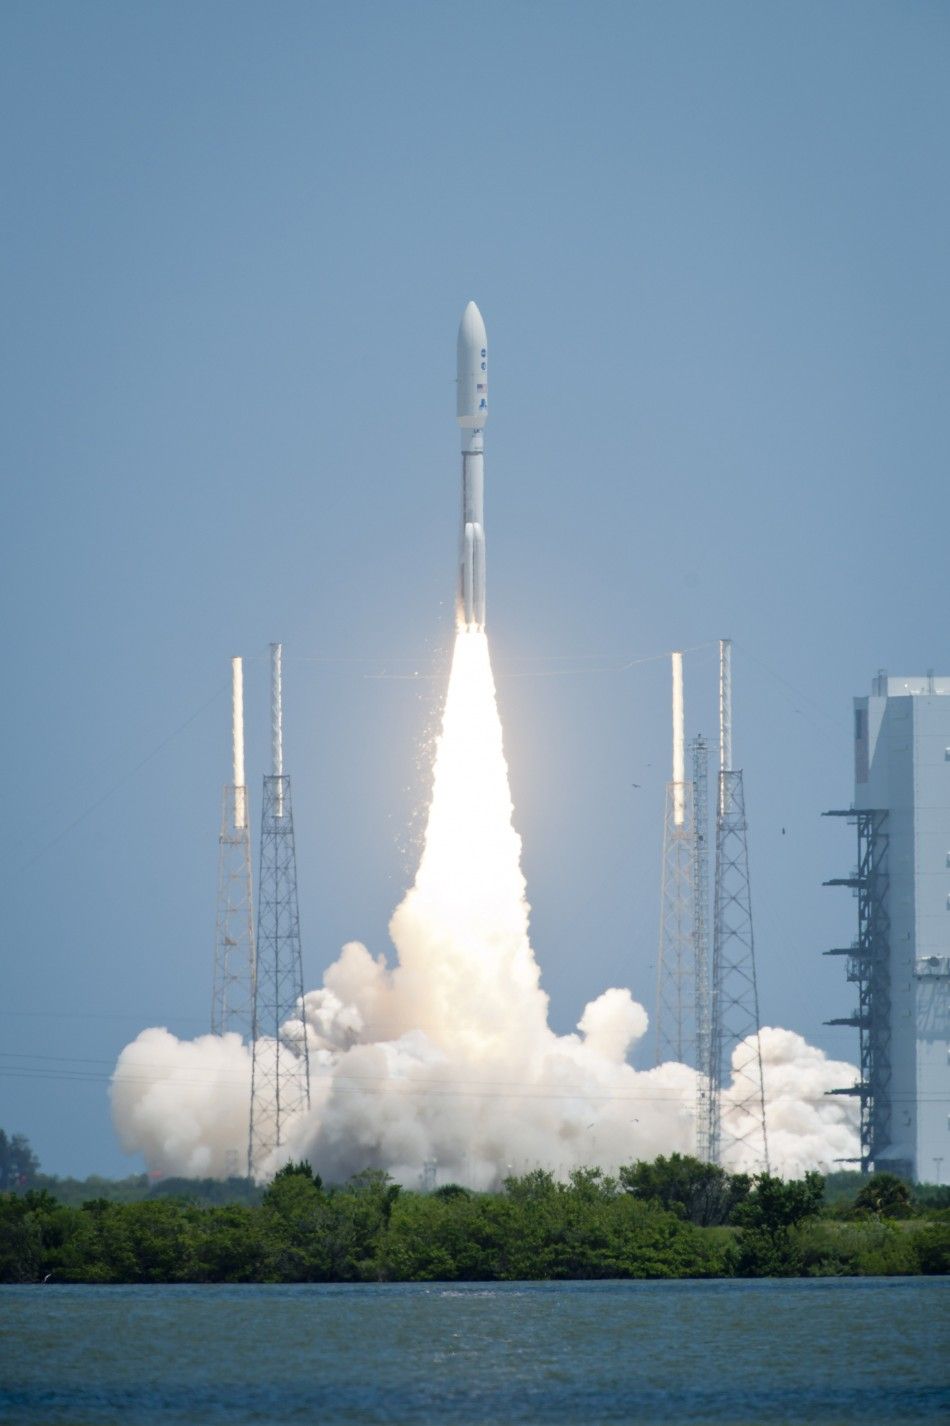 An Atlas V rocket launches with the Juno spacecraft payload from Space Launch Complex 41 at Cape Canaveral Air Force Station in Florida